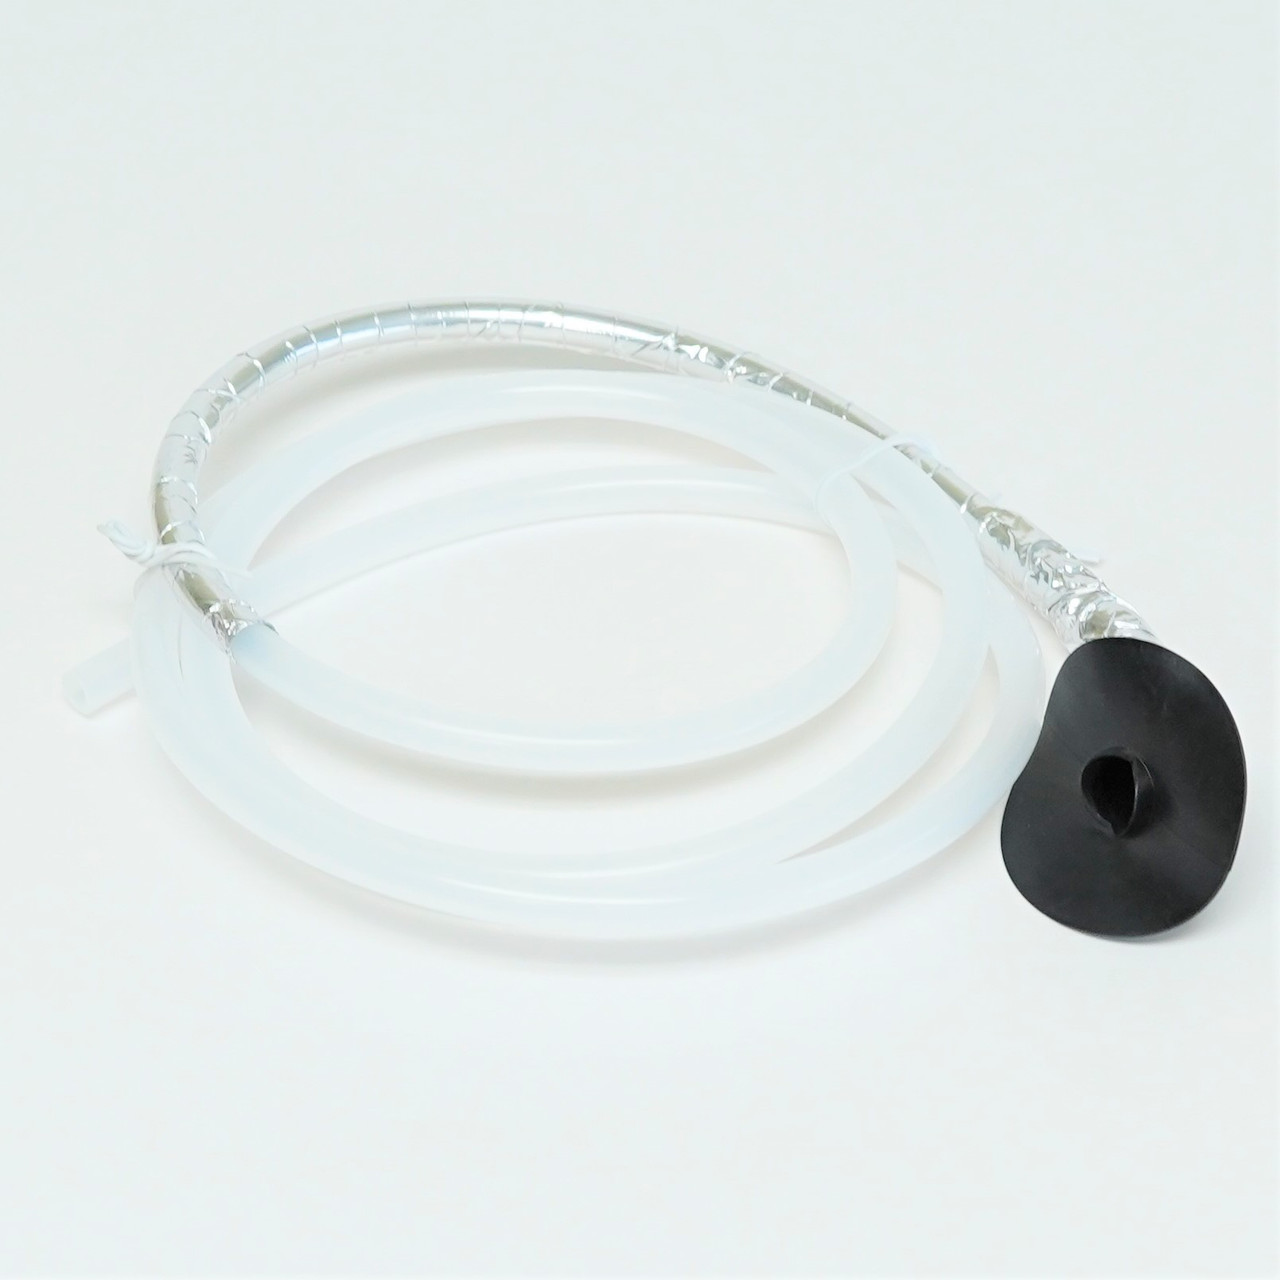 Chinese Supplier for Electrolux Glass Tube Heater for Refrigerator